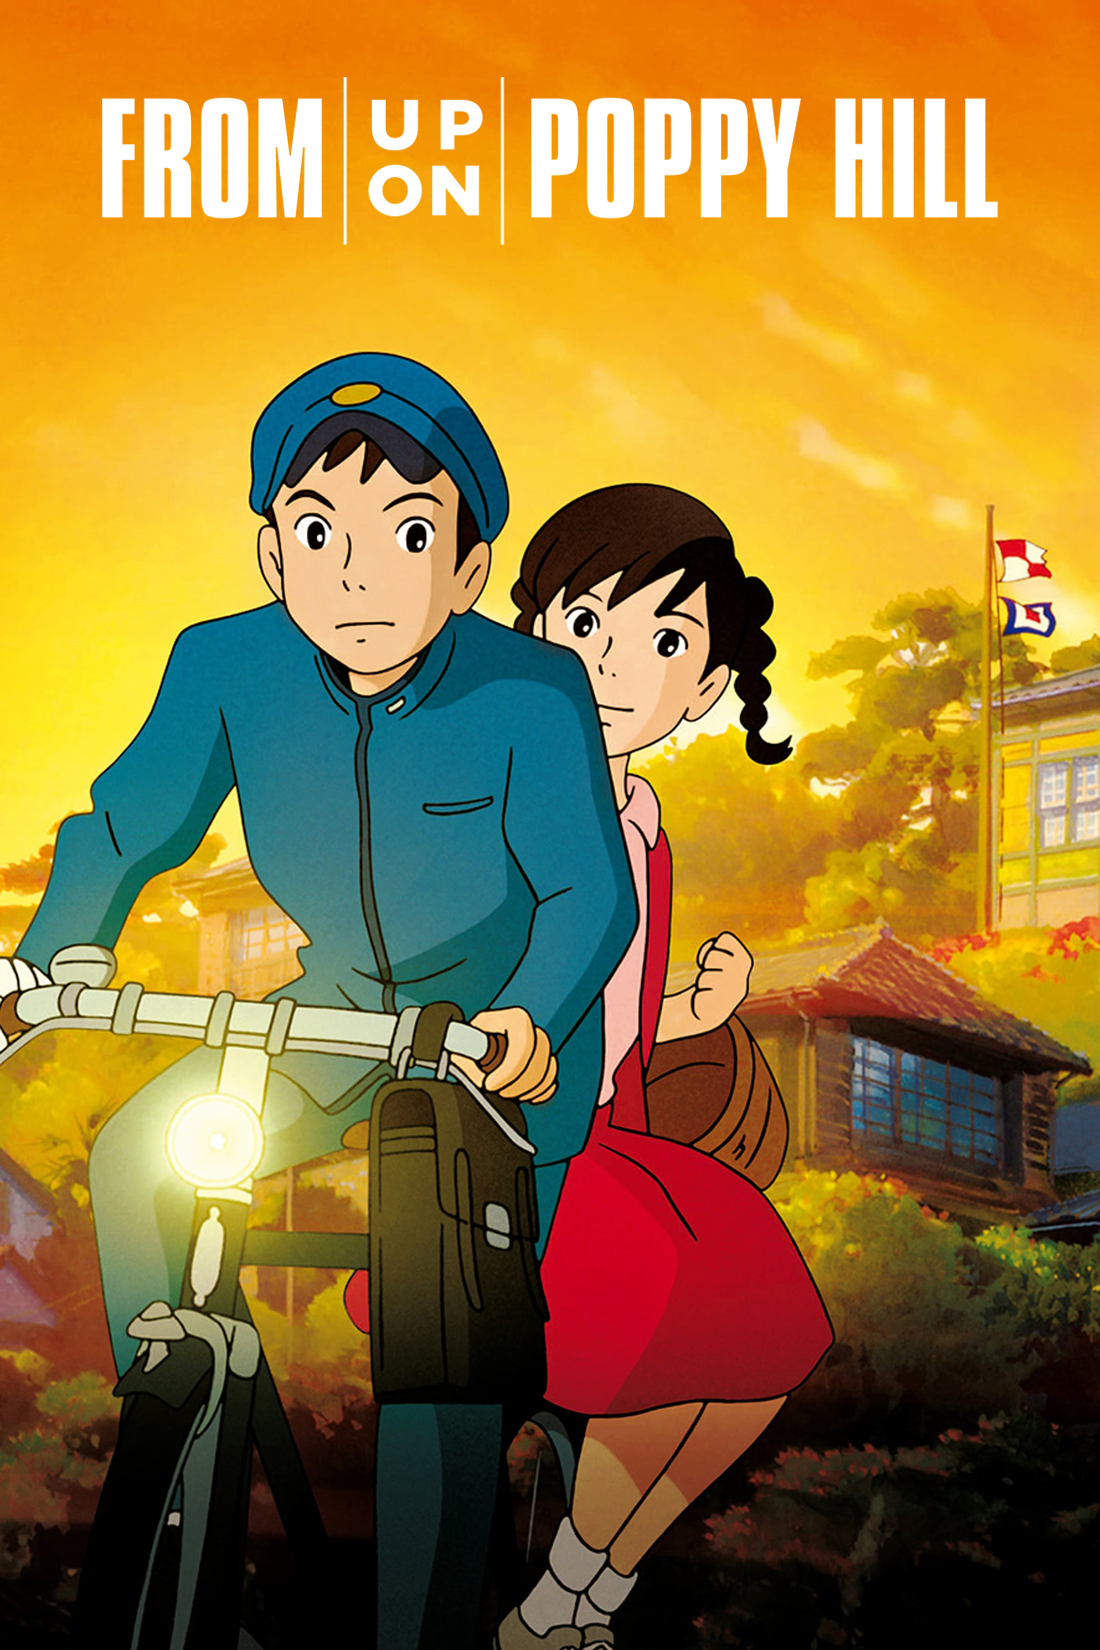 From Up on Poppy Hill | Pelicula | Dual Audio | 2011